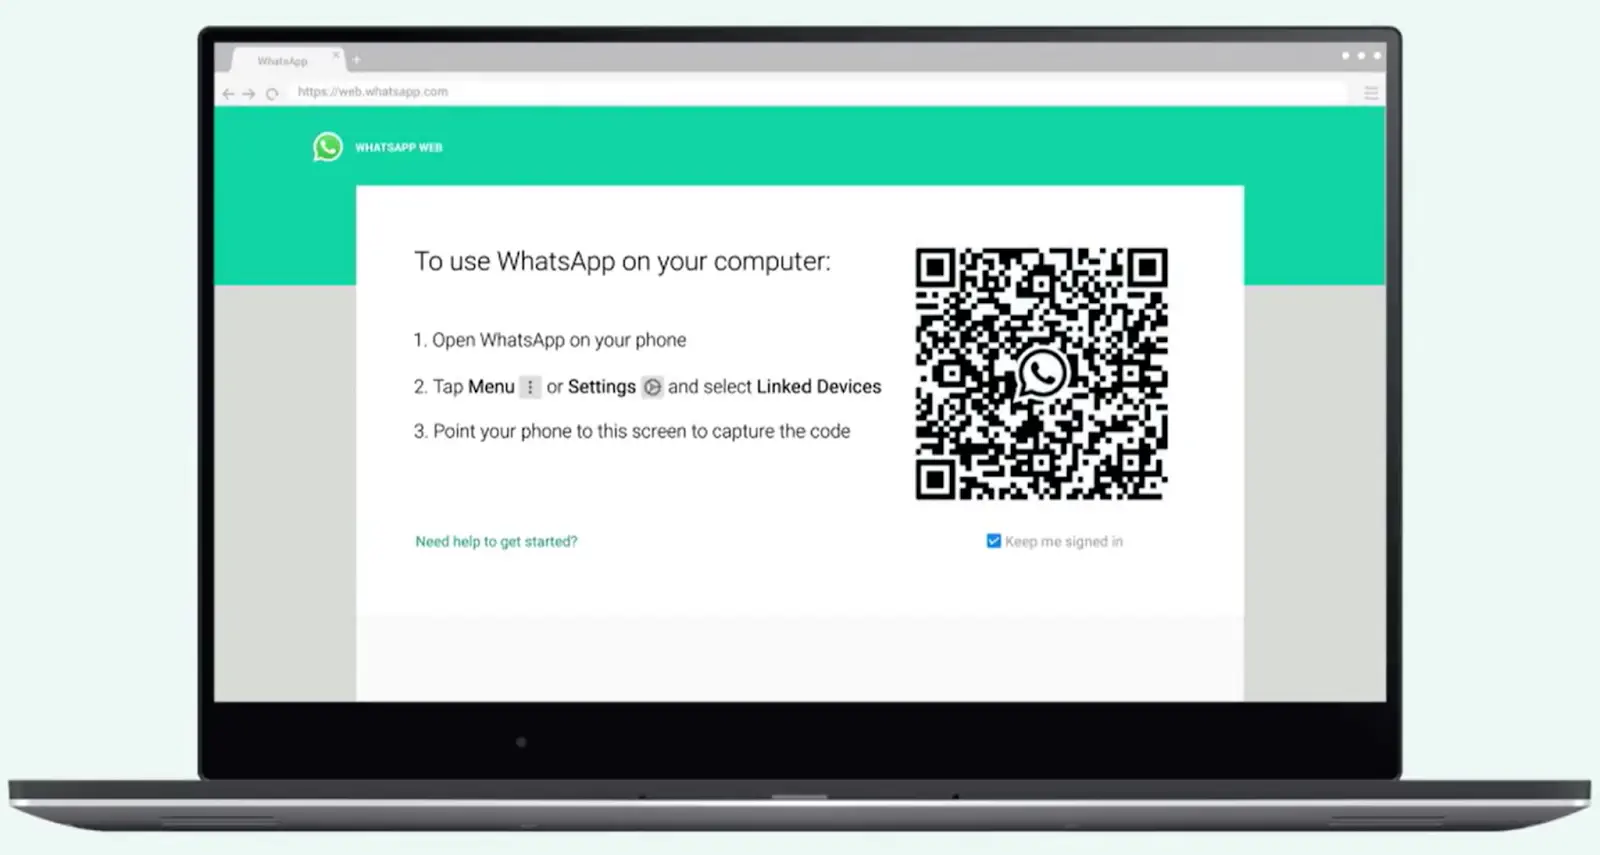 QR code for connecting a device to WhatsApp account.